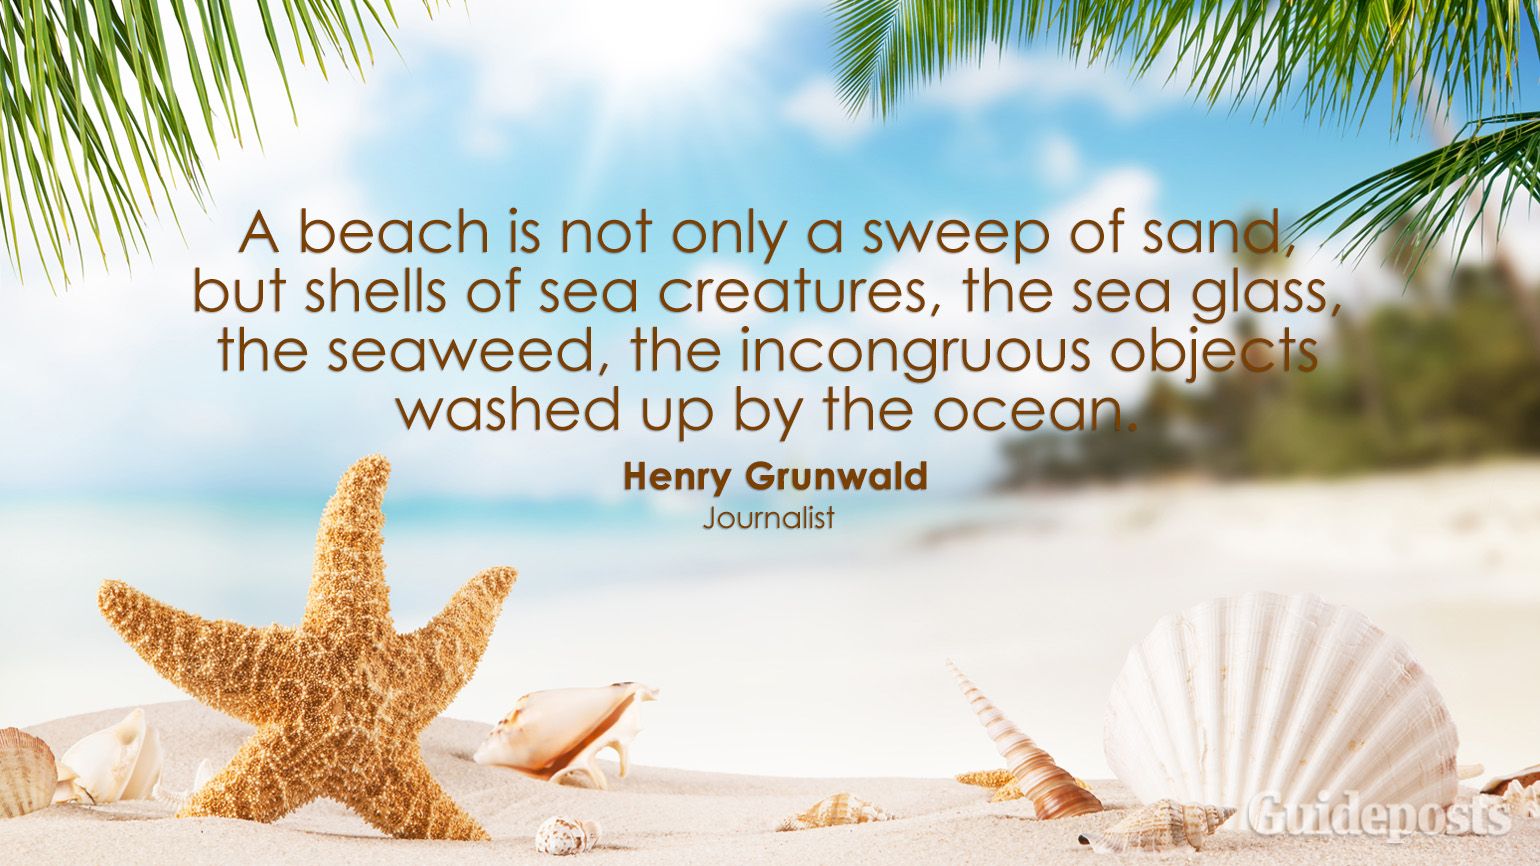 A beach is not only a sweep of sand, but shells of sea creatures, the sea glass, the seaweed, the incongruous objects washed up by the ocean. Henry Grunwald